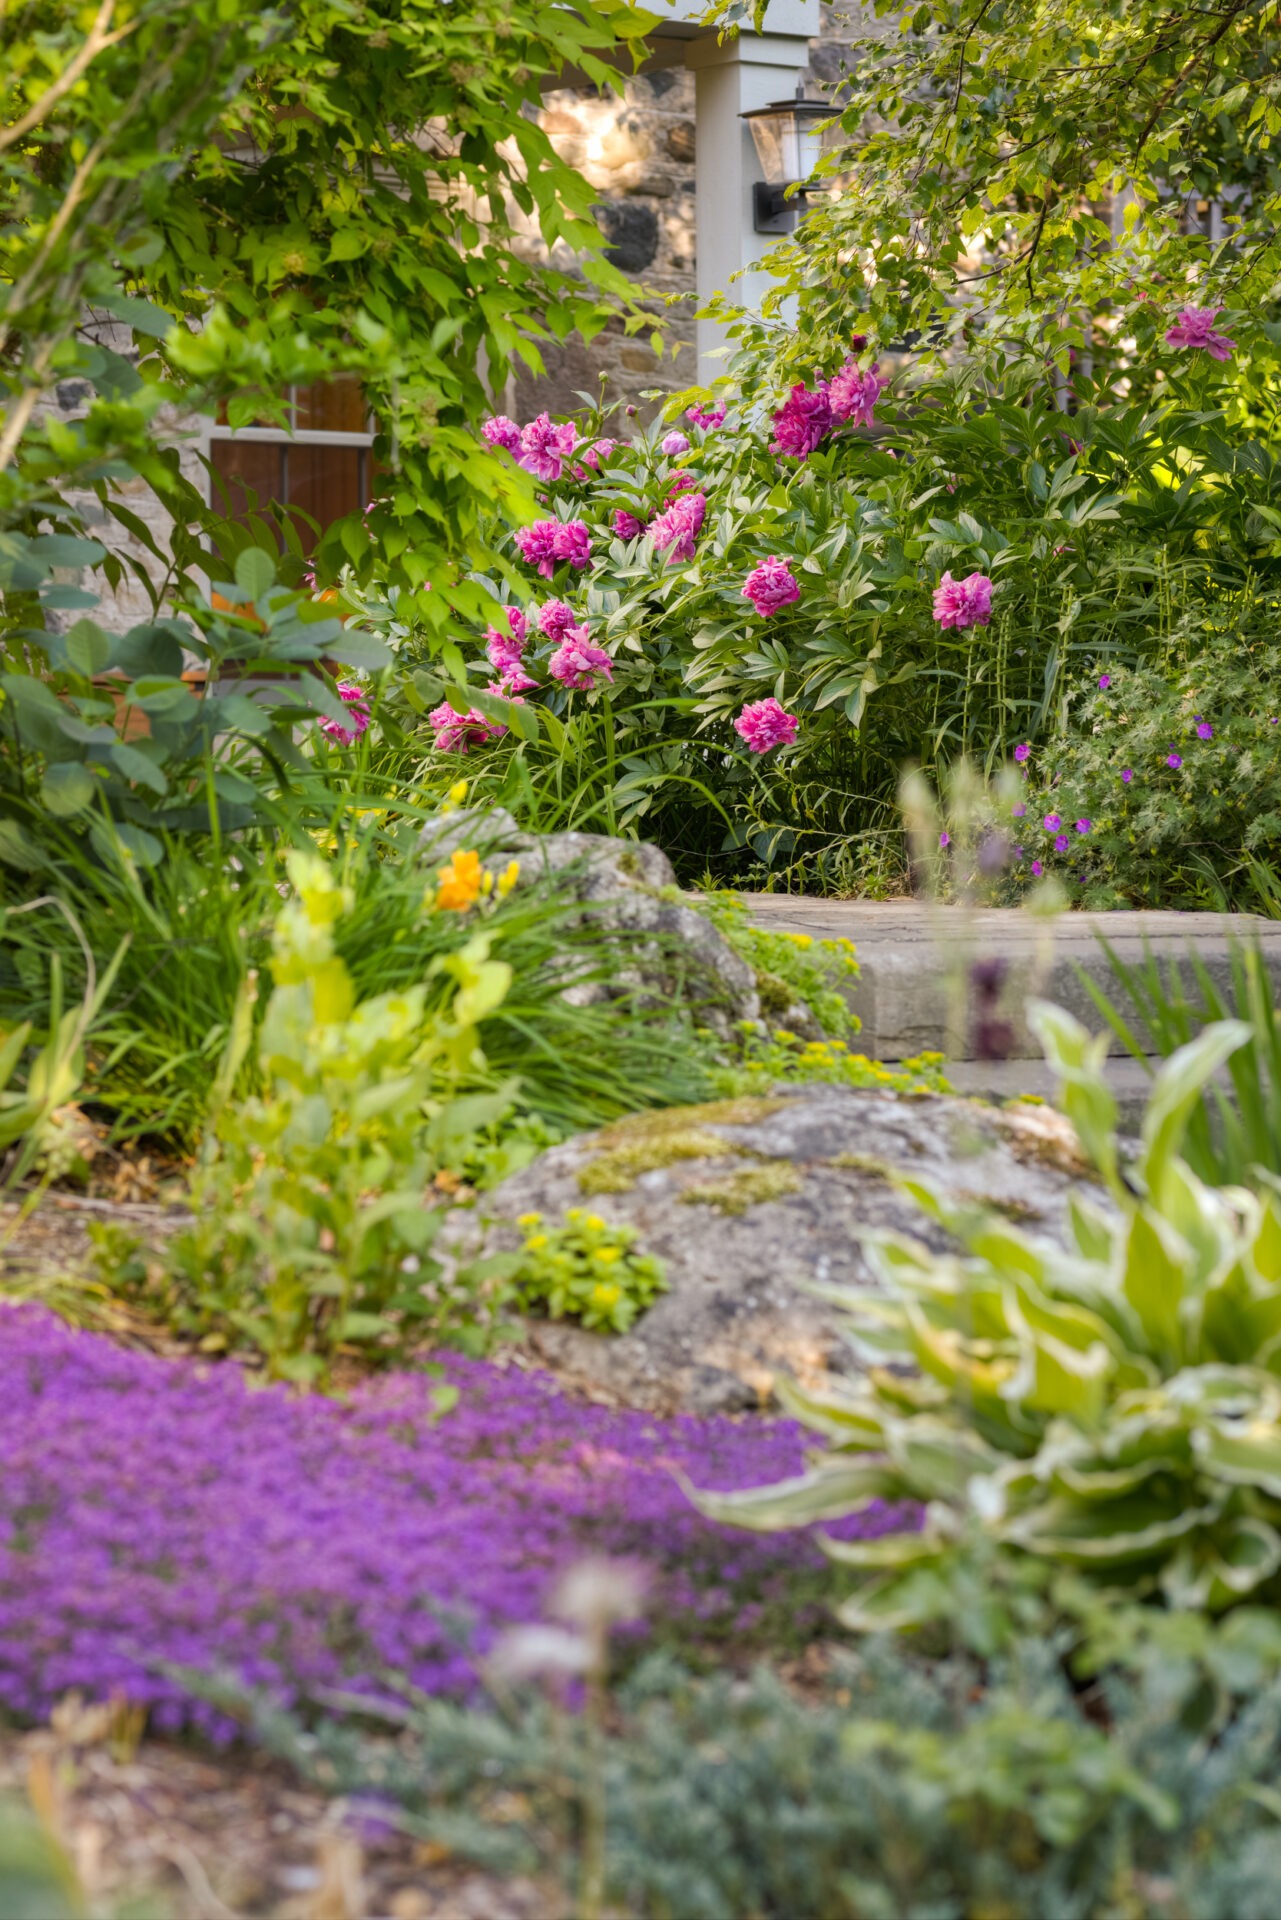 A lush garden with vibrant pink peonies, purple ground cover, and various green plants, set against a backdrop of a stone wall and building.